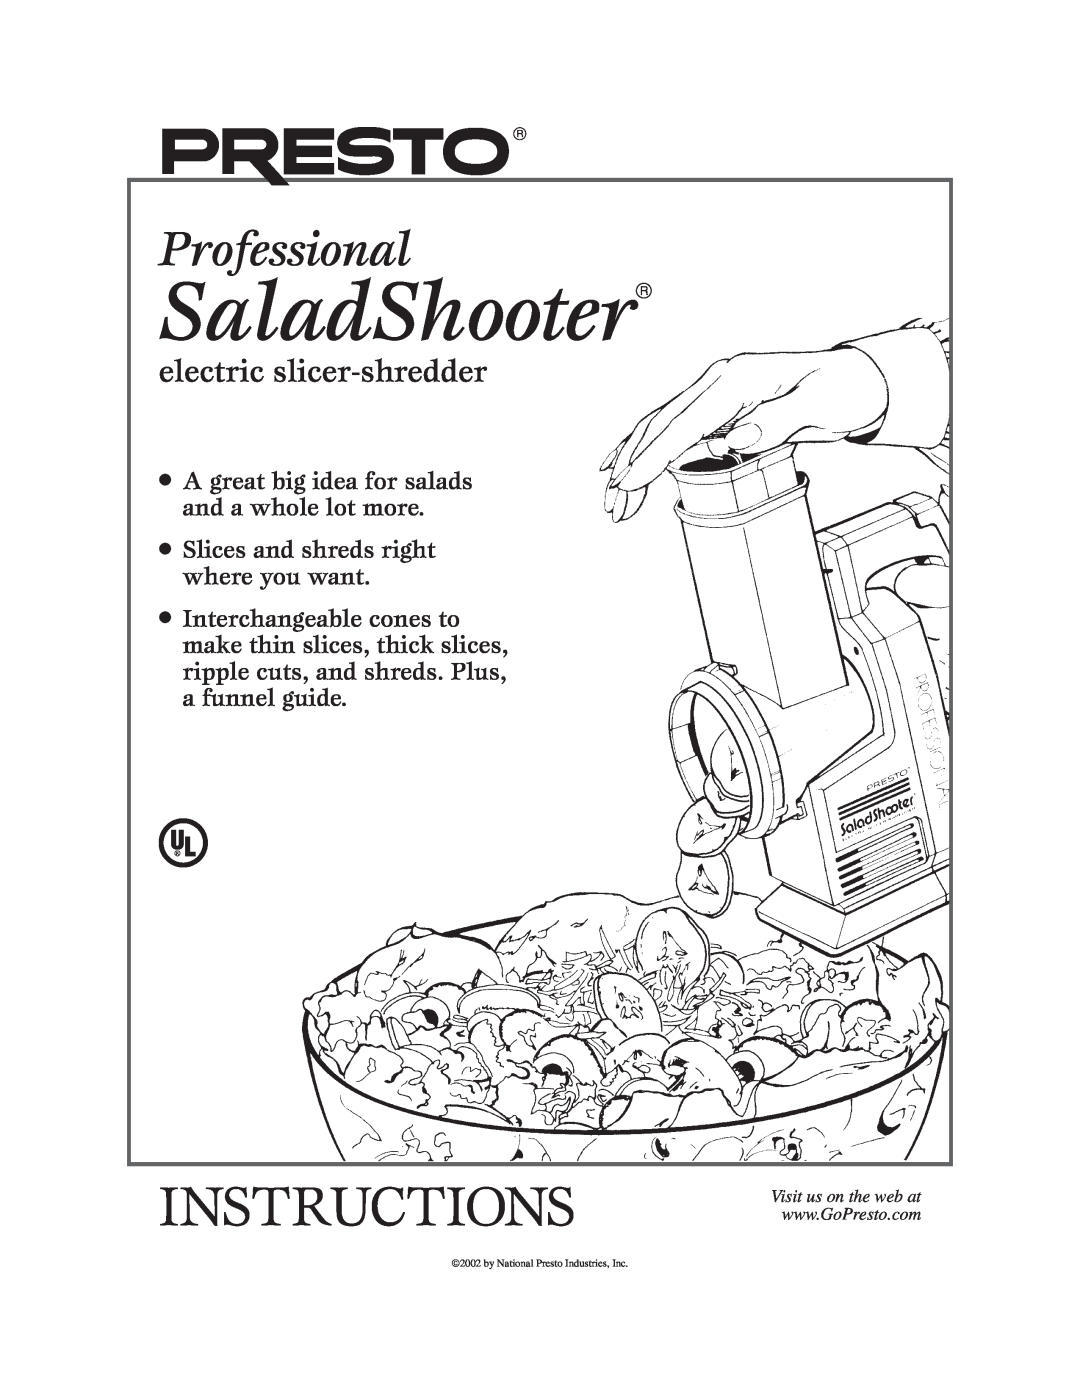 Presto electric slicer-shredder manual SaladShooter, Instructions, Professional,  Slices and shreds right where you want 